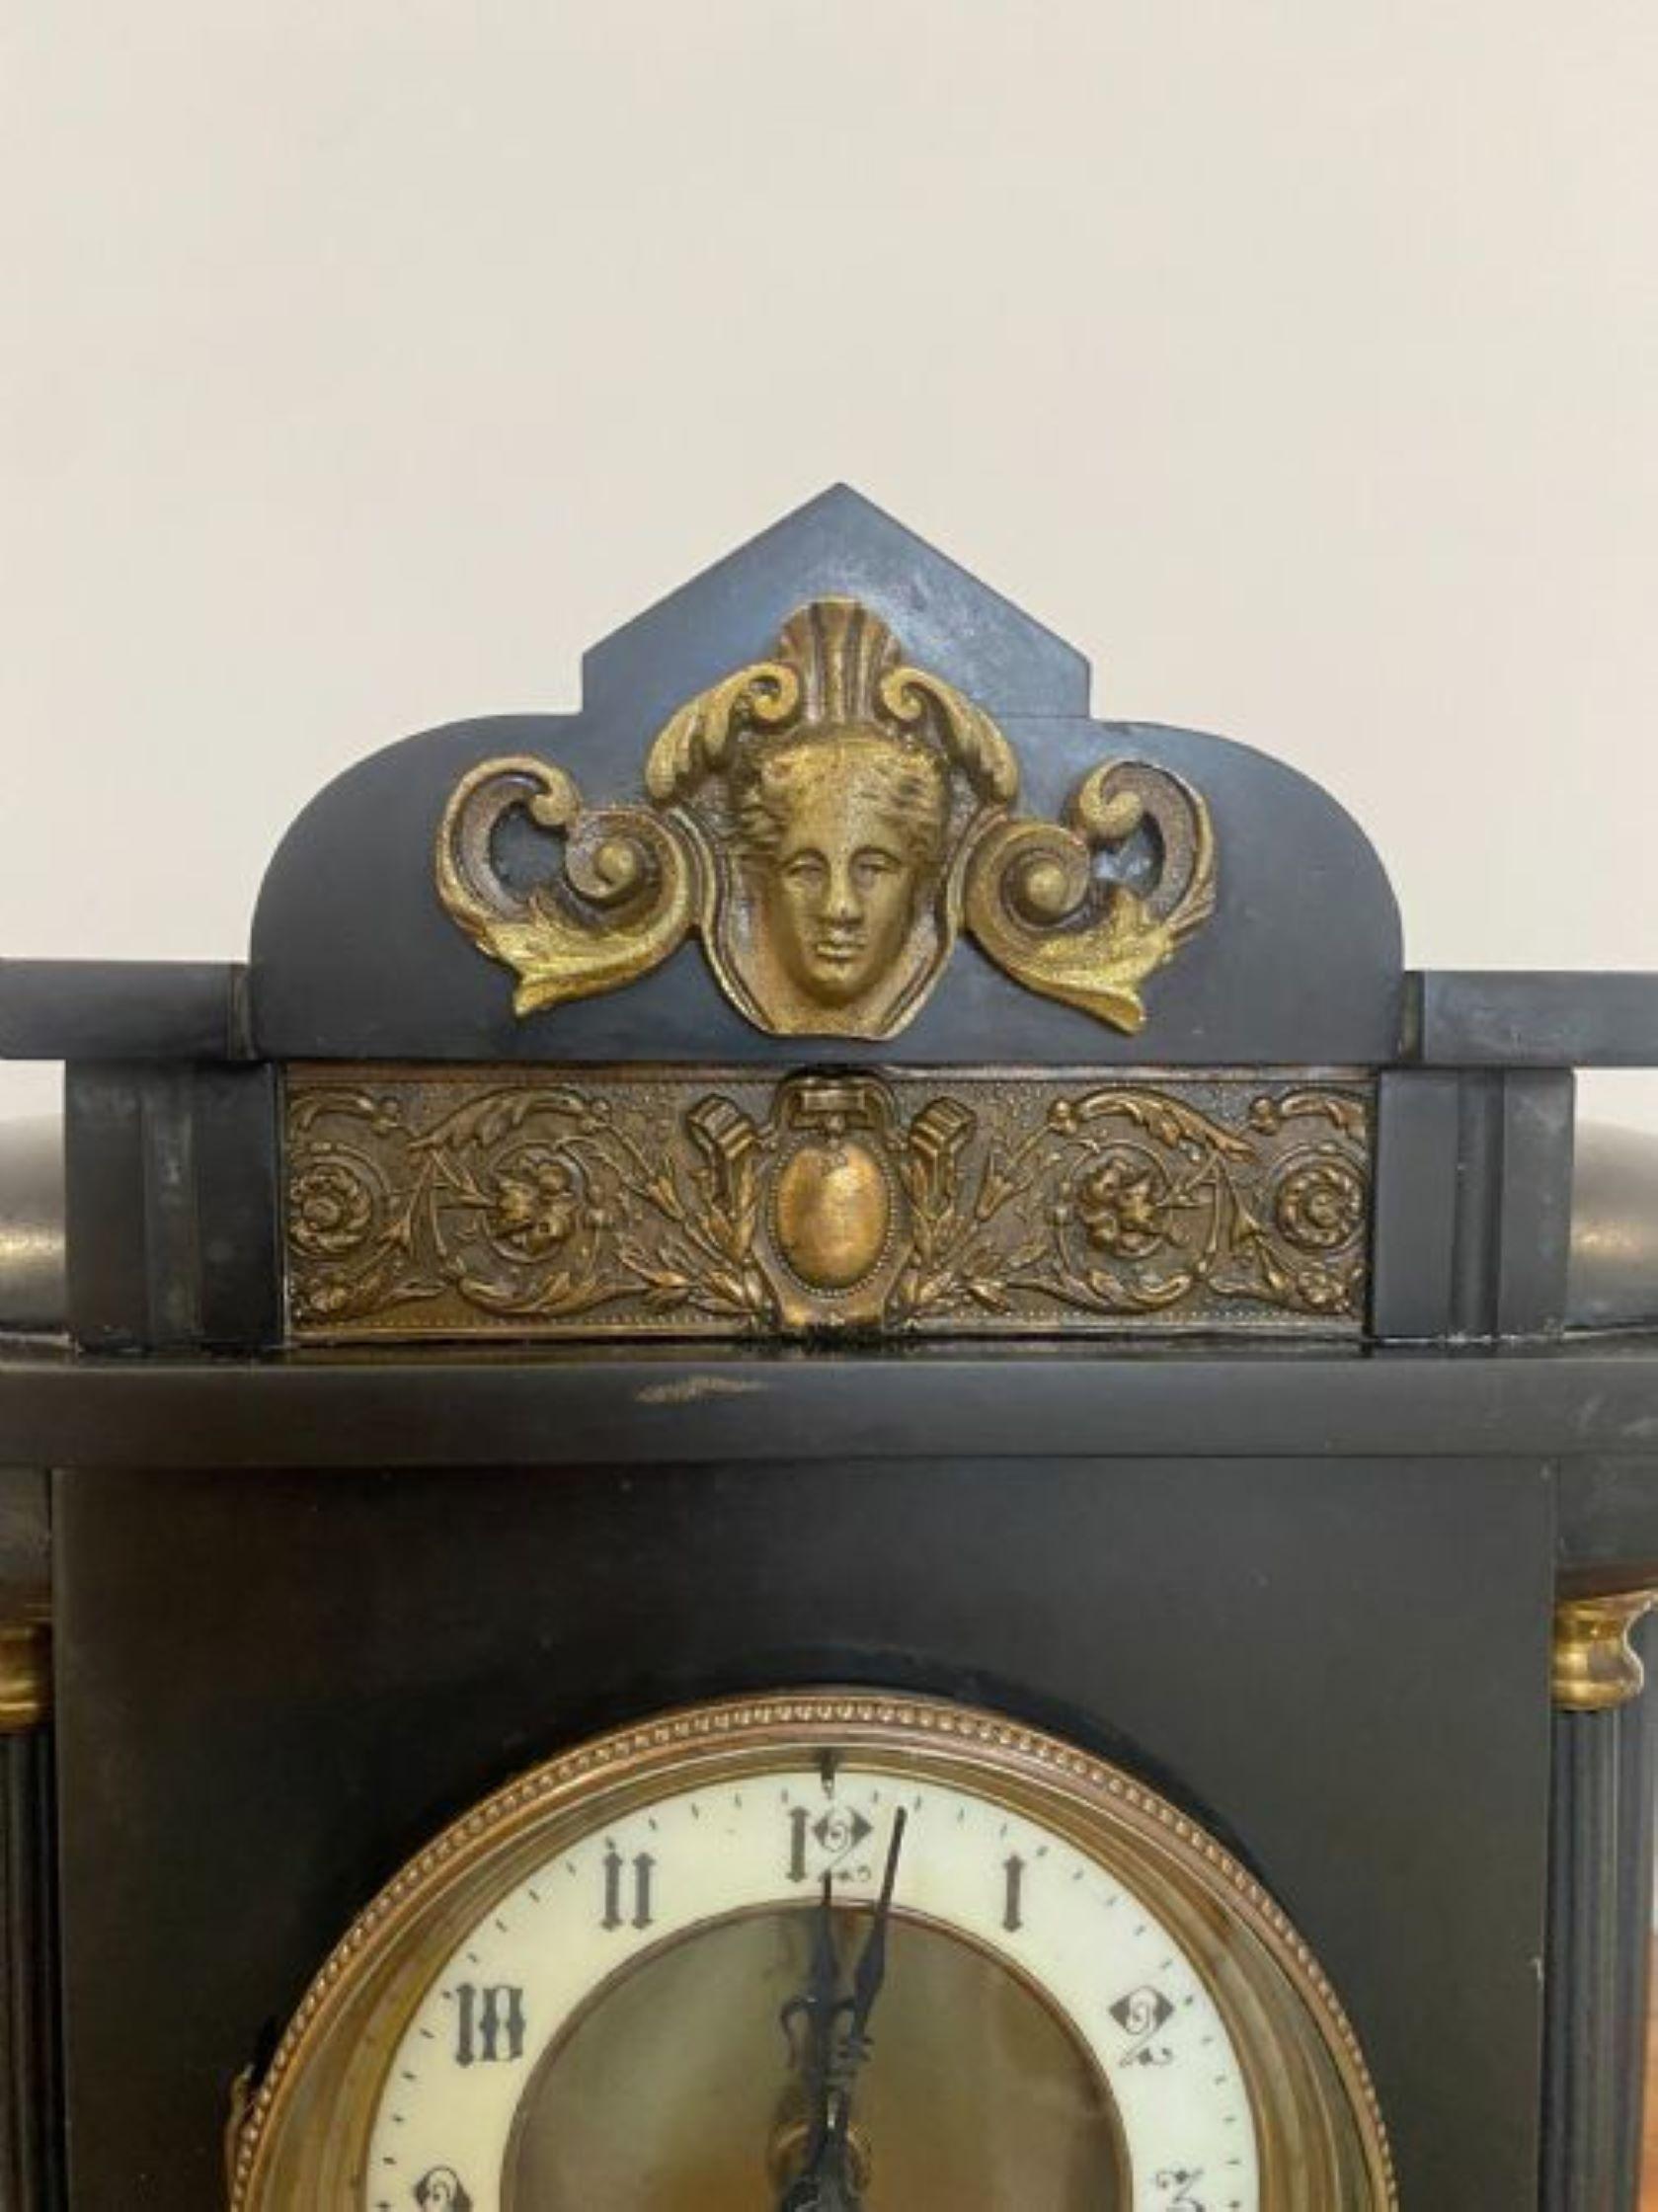 Quality antique Victorian marble mantle clock having black Roman numerals on a cream chapter ring, with a pavilion shaped case with six reeded columns on a stepped plinth base. Brass detail. Original hands and key
Please note all of our clocks are